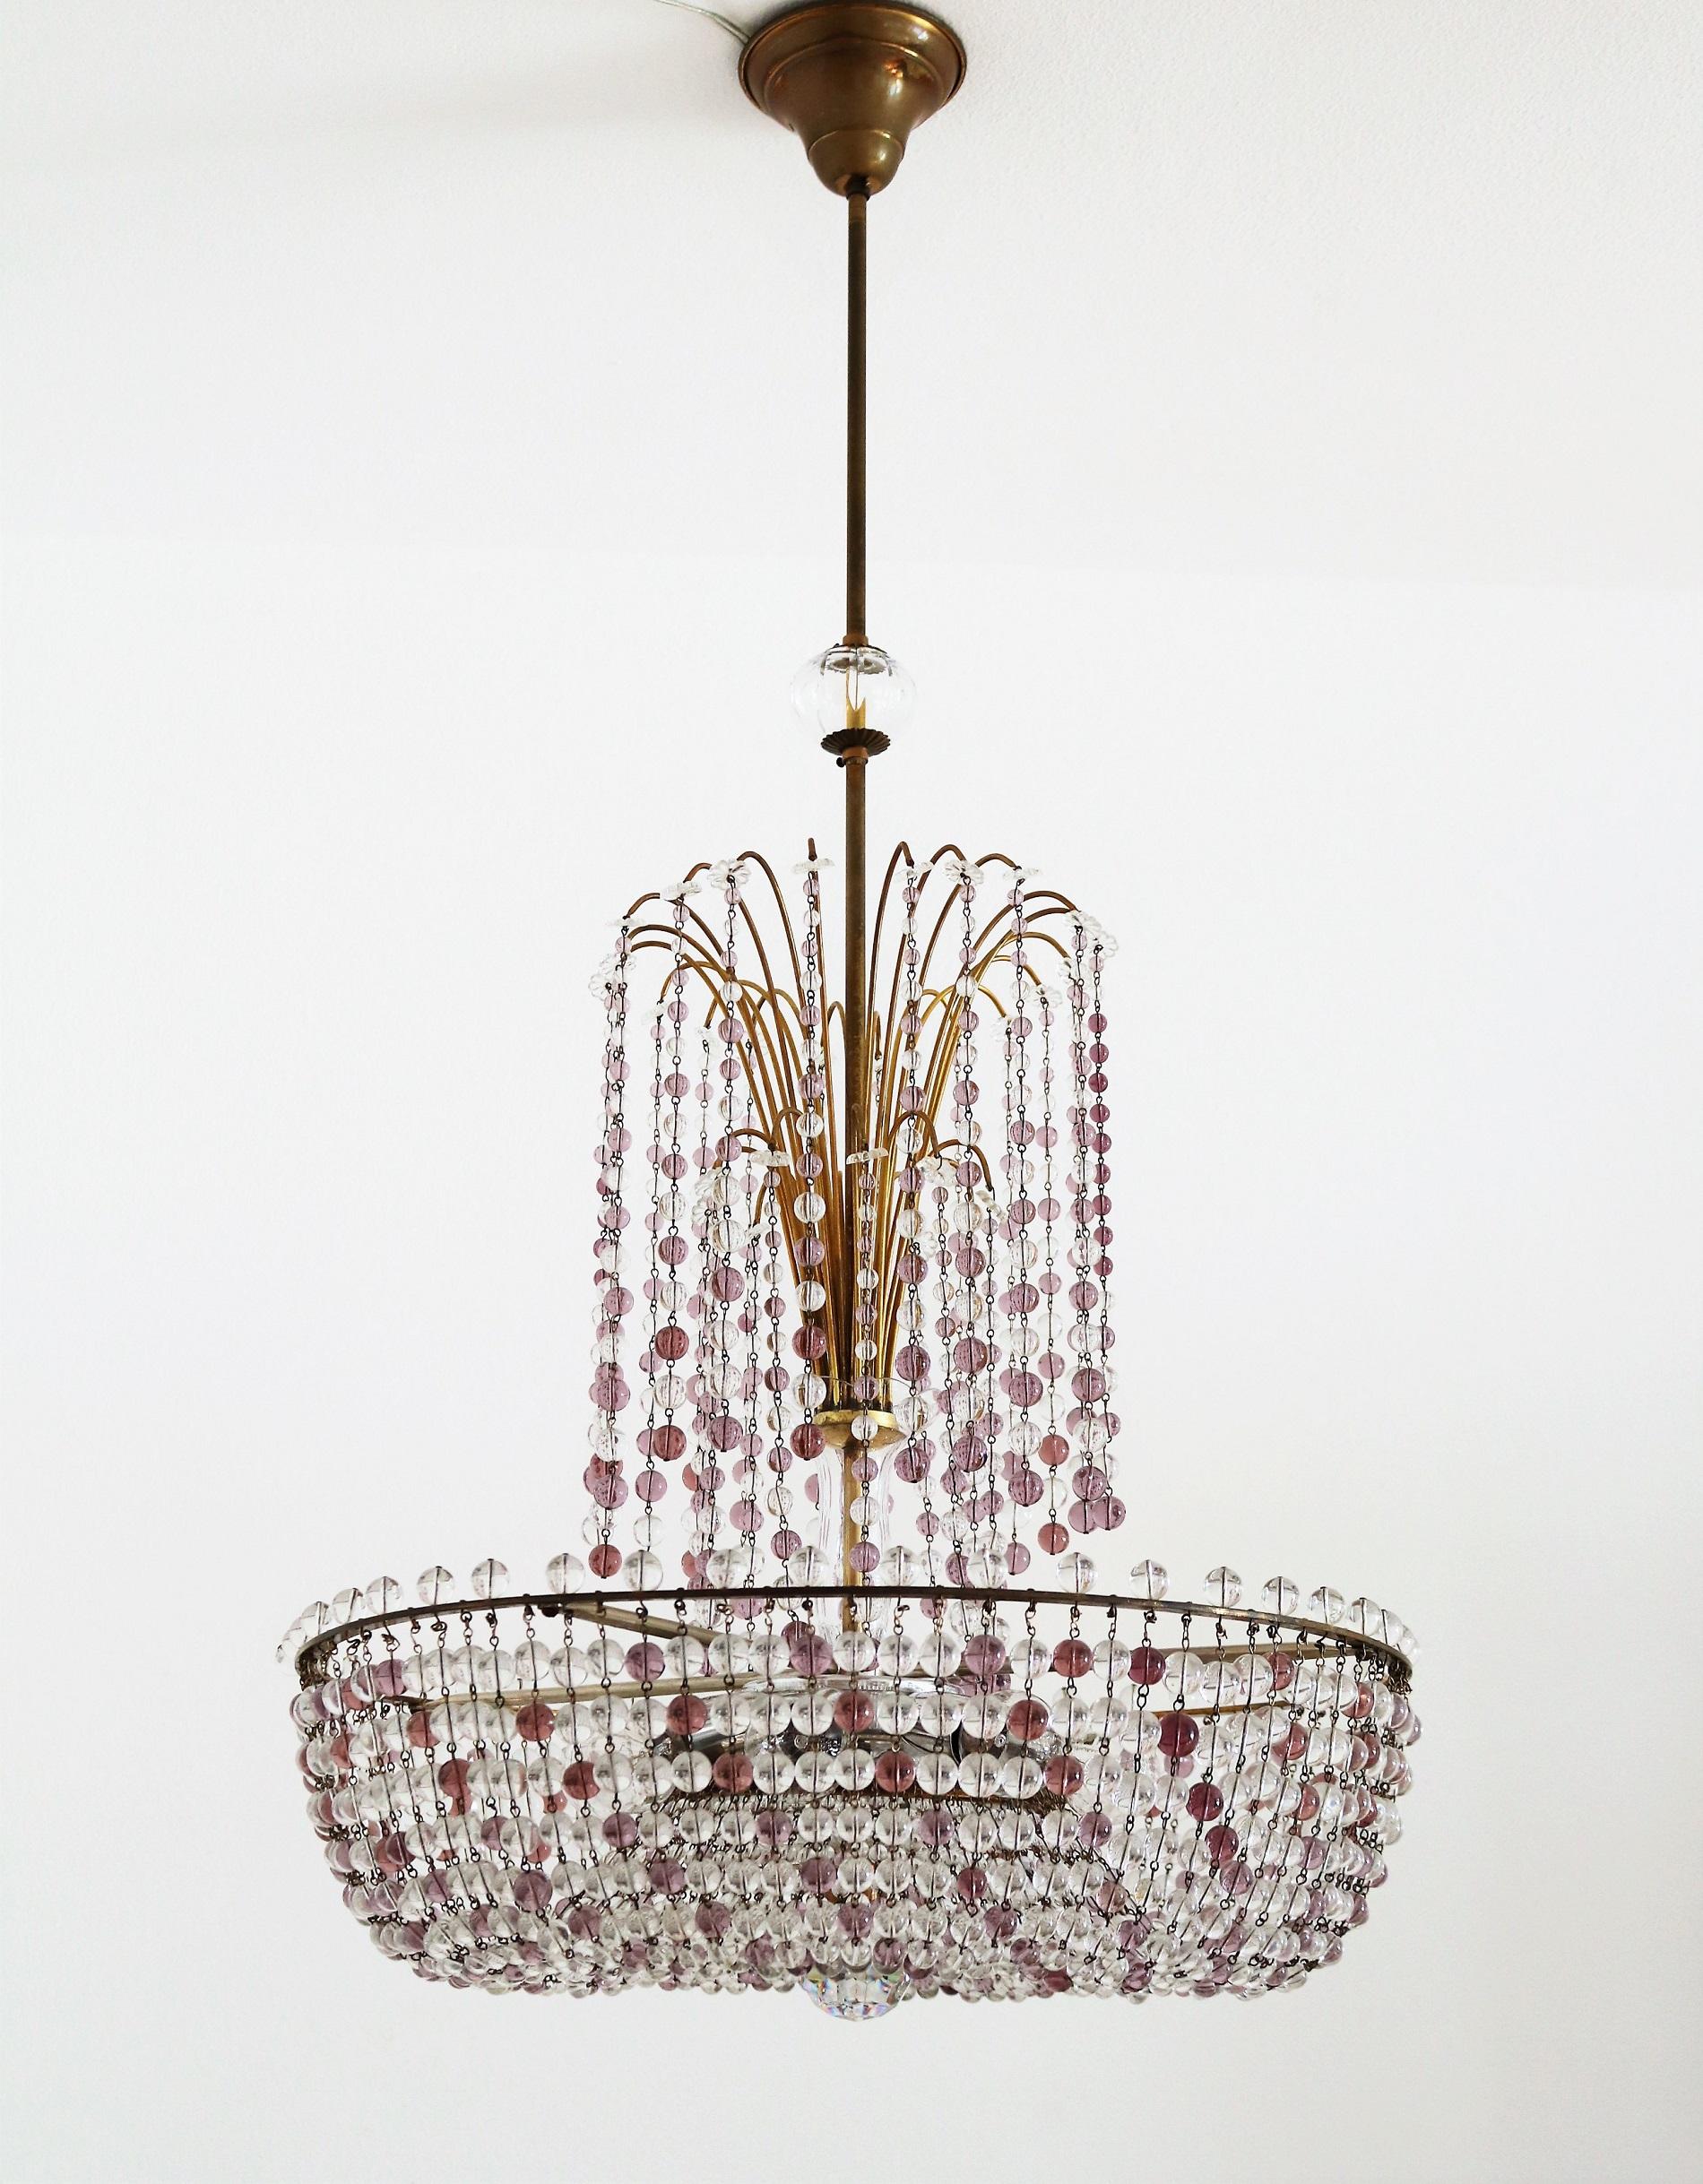 Gorgeous and rare big chandelier with countless Murano crystal drops in transparent and light purple (lavender - lilac) color.
The lamps frame as well as bar to ceiling and ceiling rose are made of brass with nice dark patina.
Inside the lamp are